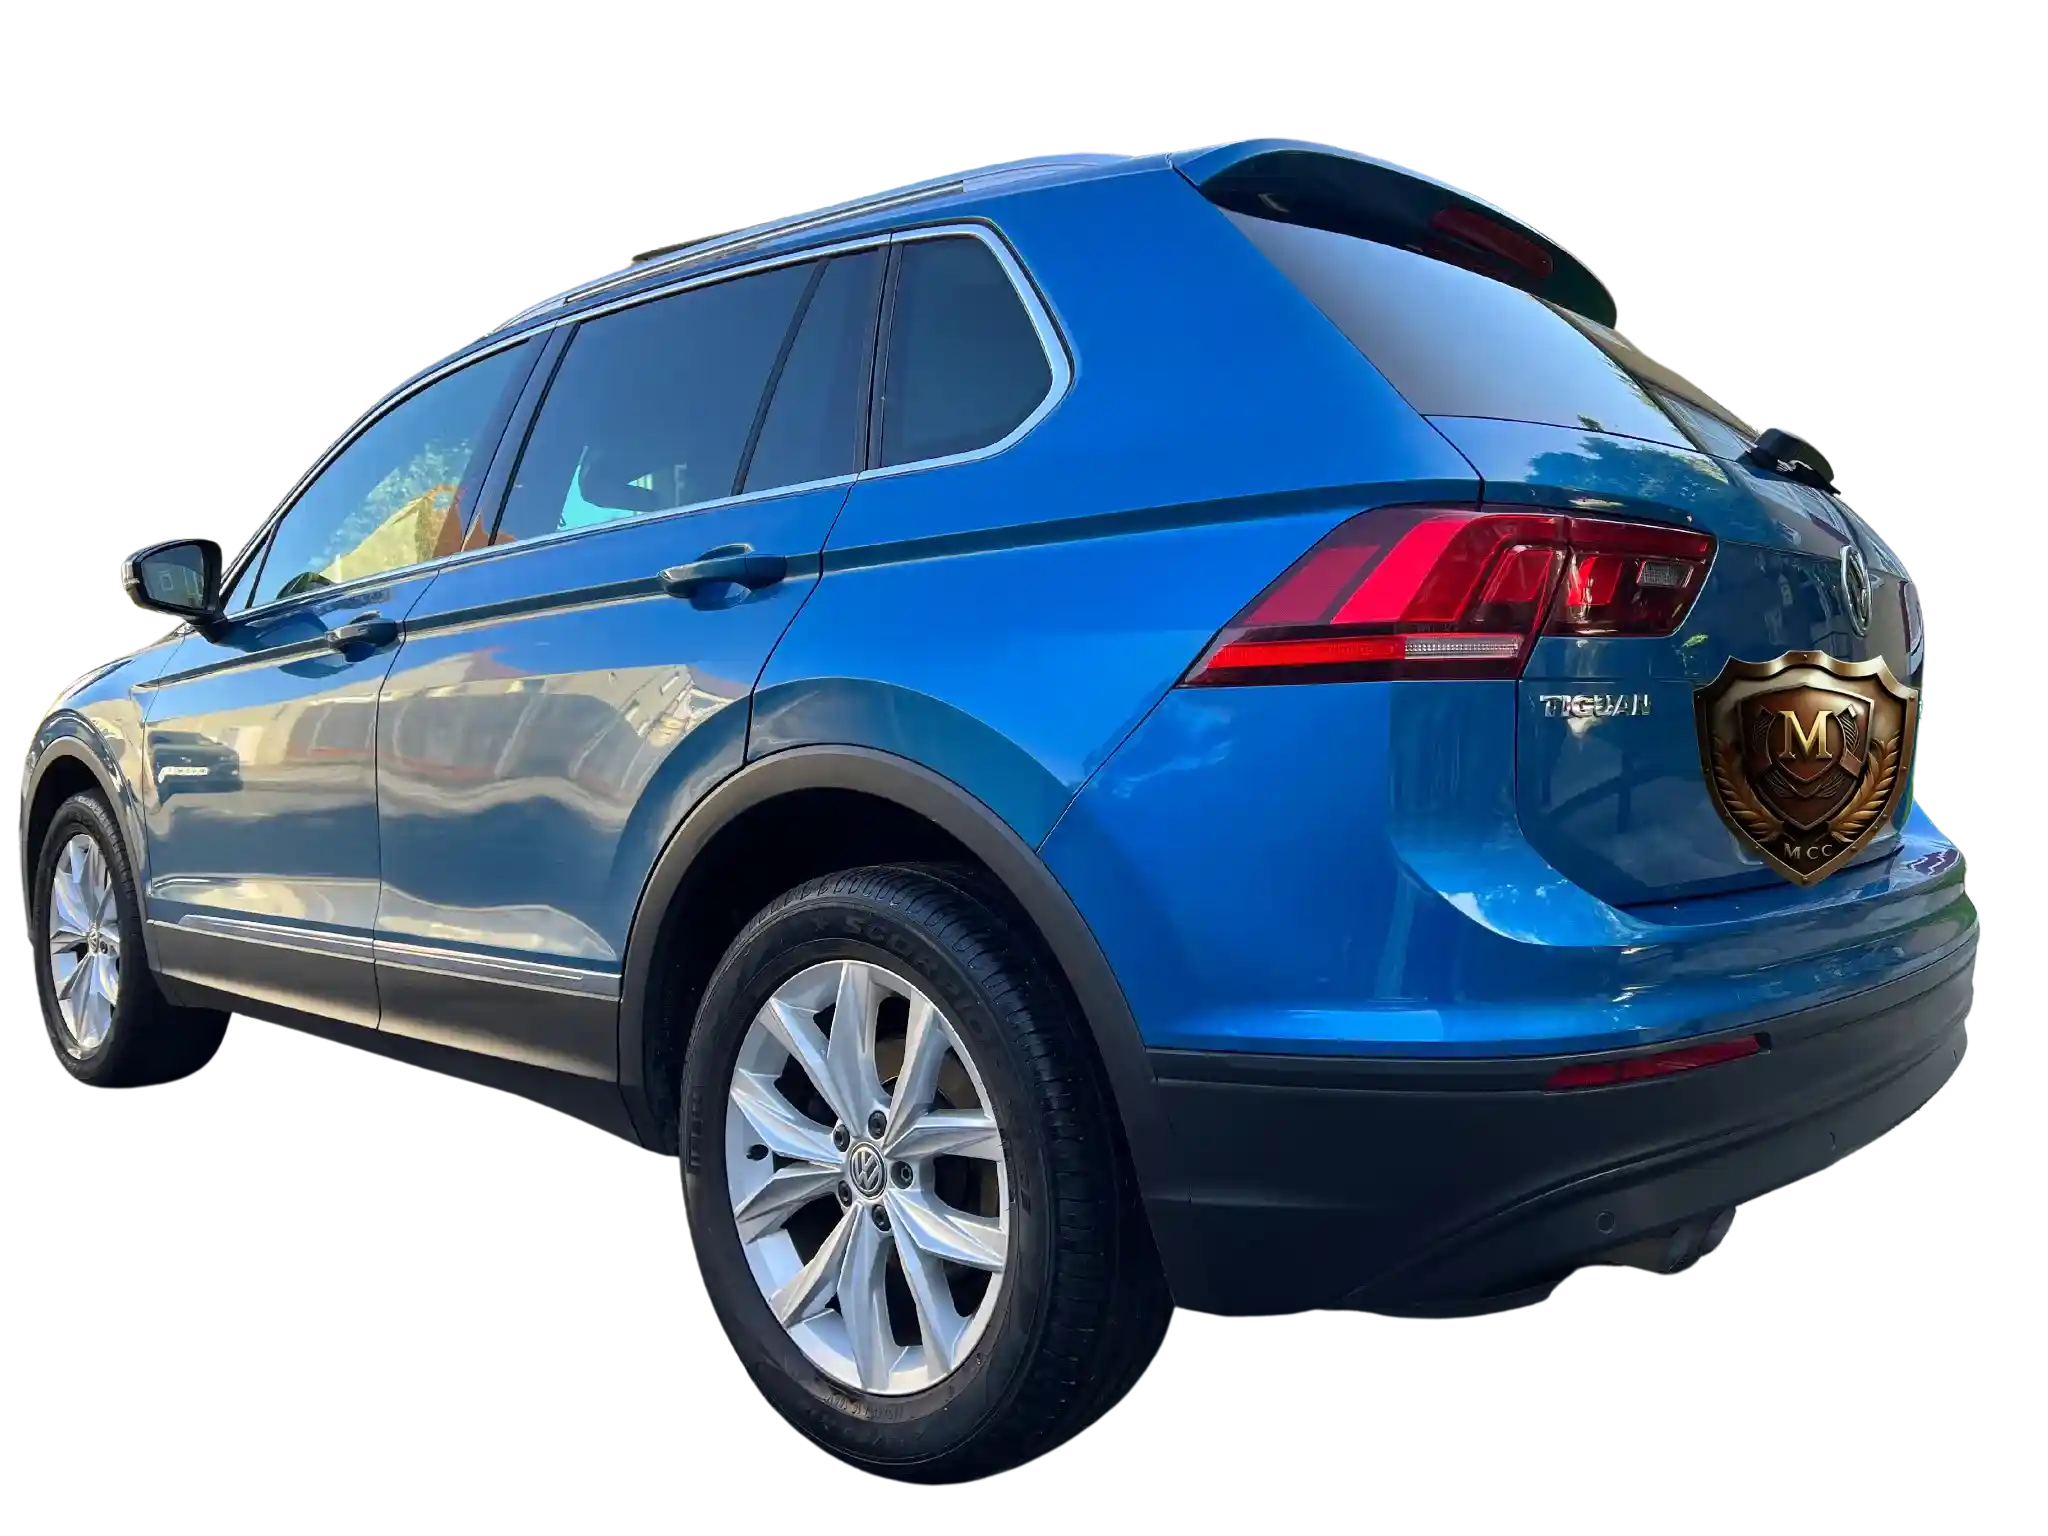 Eco-friendly waterless valeting of a Volkswagen Tiguan 4Motion in Walton-on-thames, enhancing its rugged elegance and reflecting corporate environmental values.